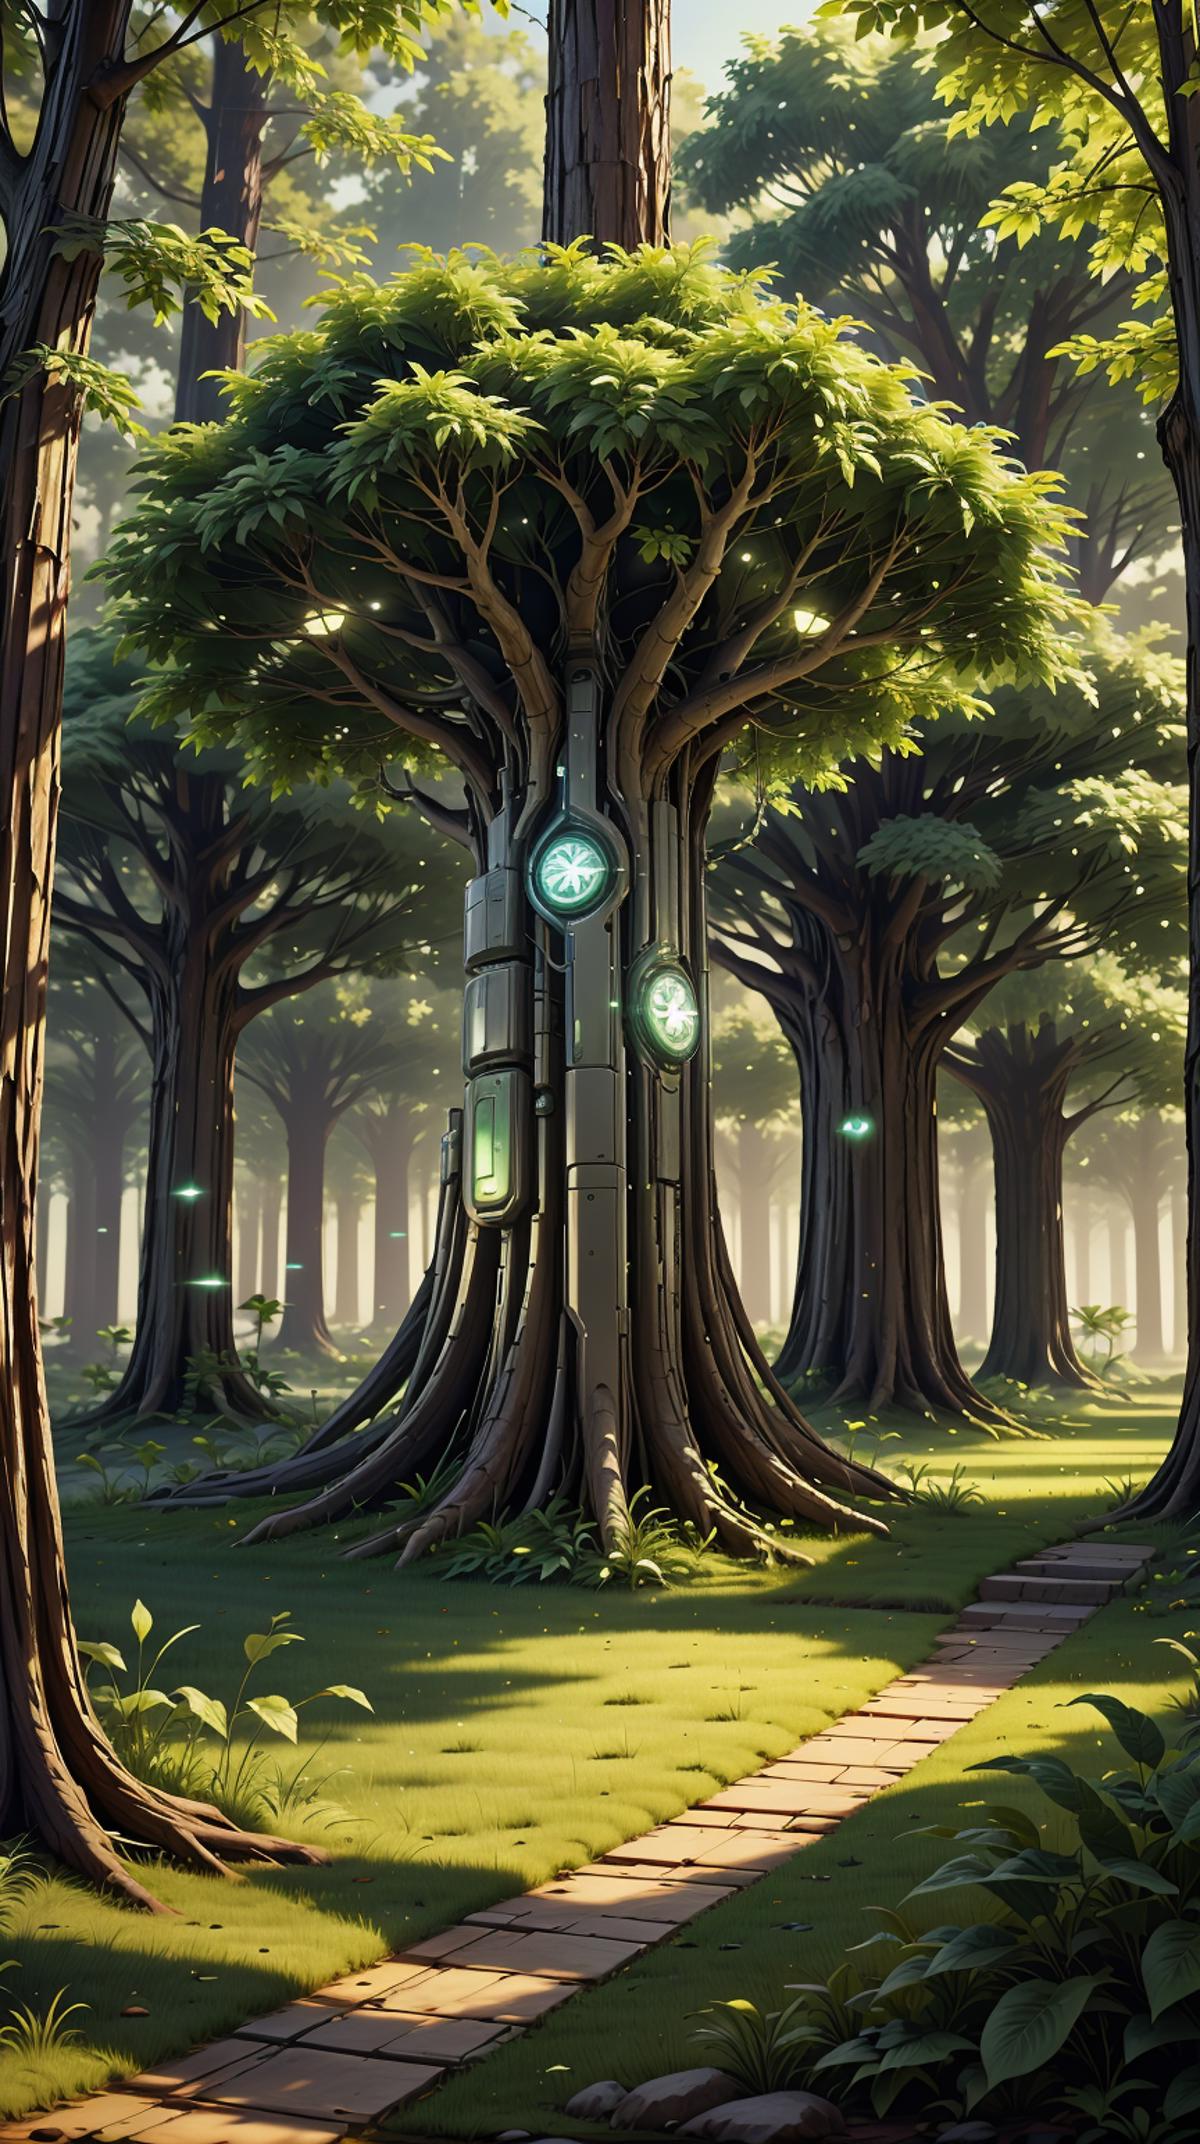 A computer-generated image of a tree with several lights on it and a clock.